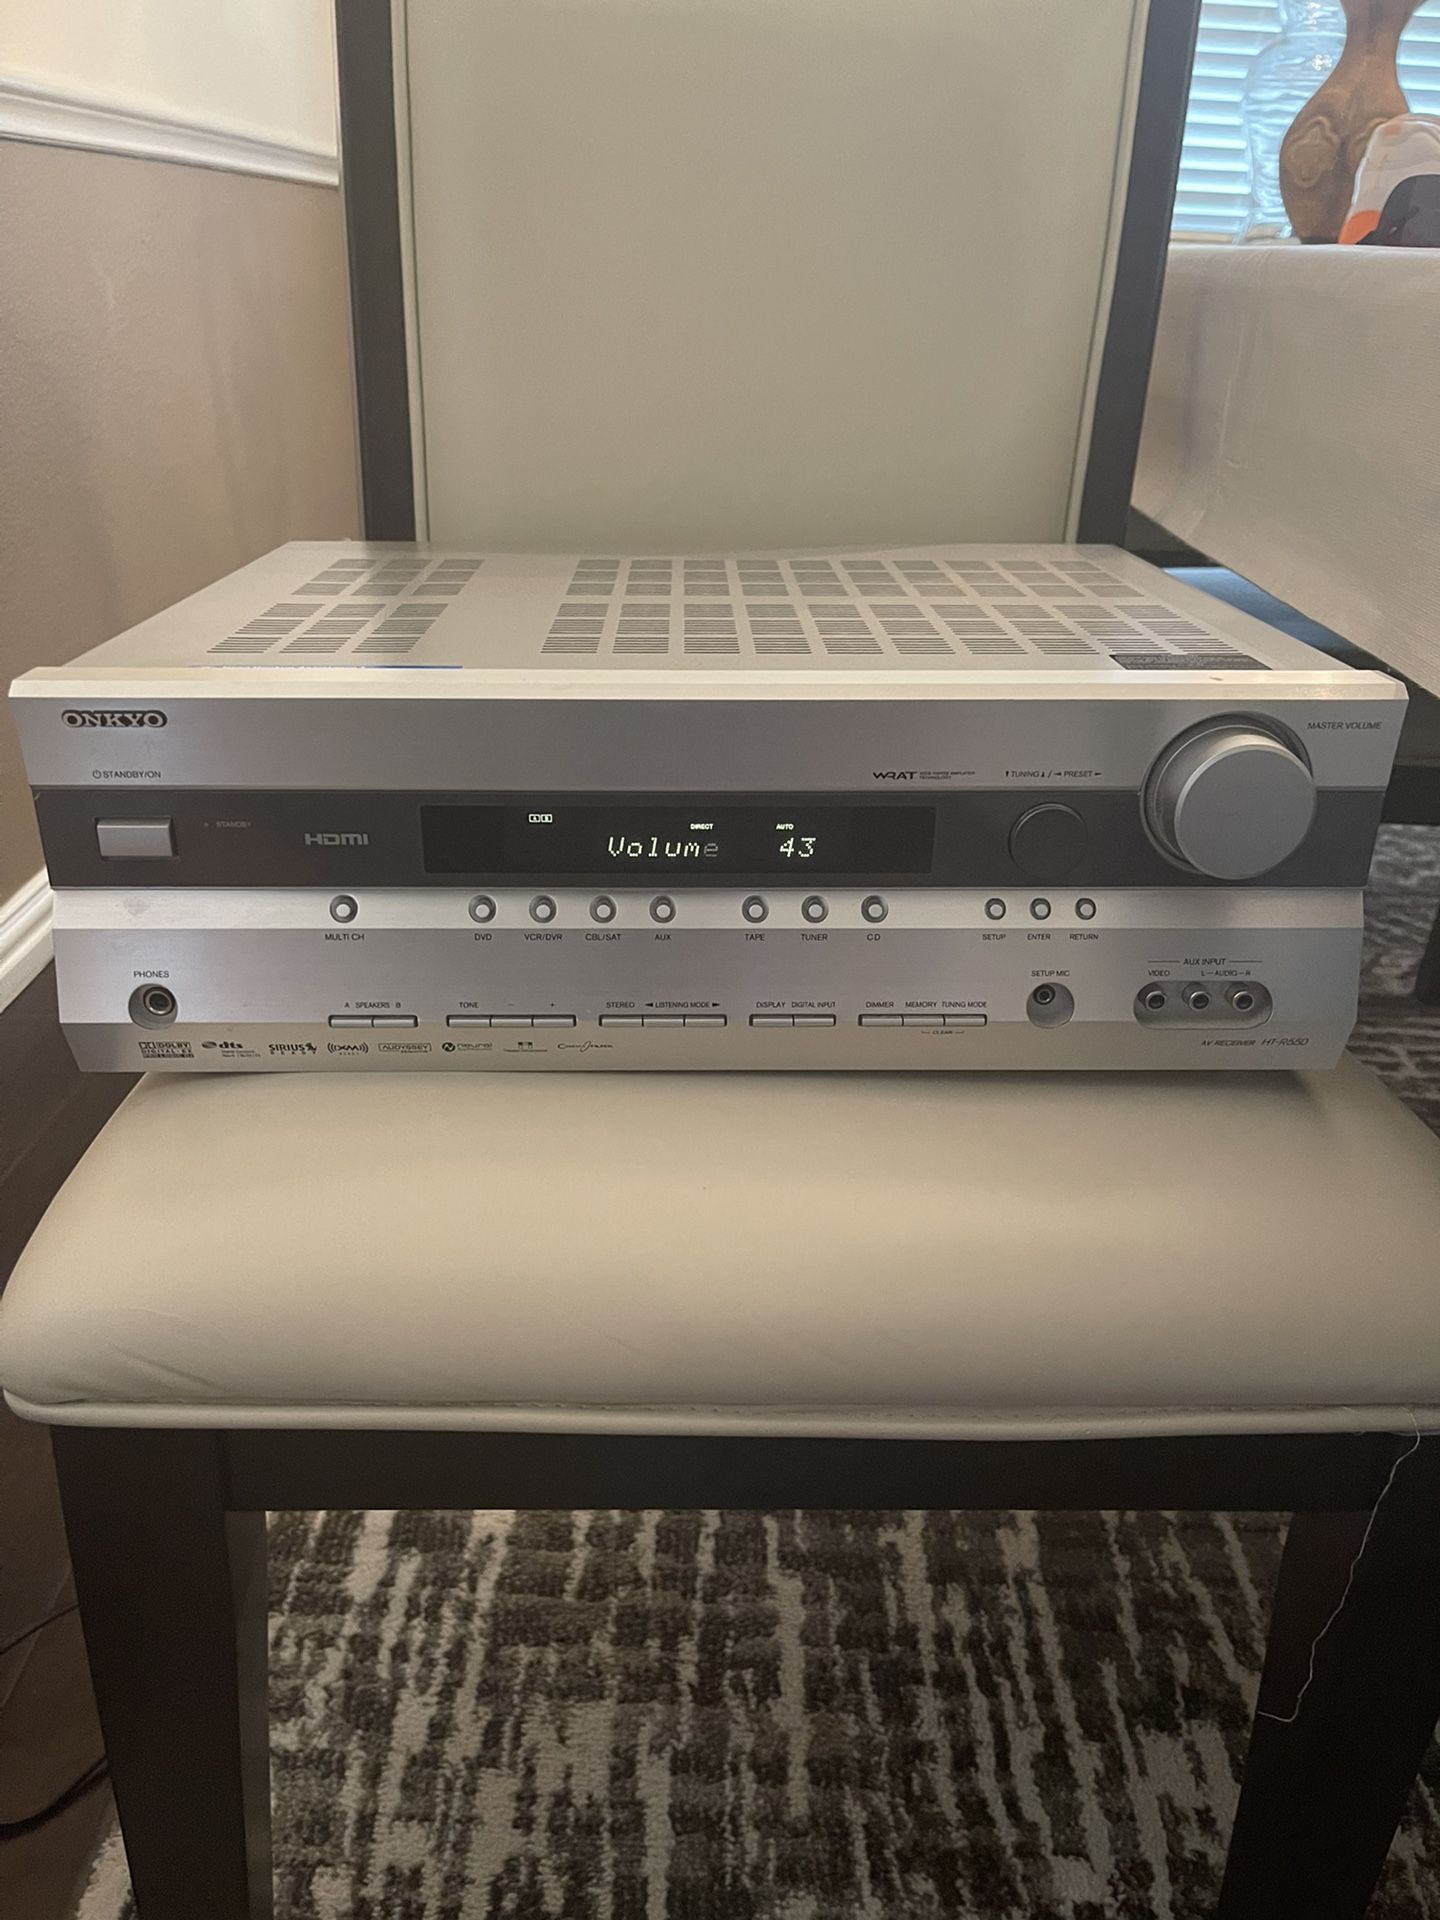 Onkyo HT-R550 Dolby/DTS 7.1 Receiver w/ Subwoofer and 7 Speaker Surround Sound  Receiver: HT-R550s Subwoofer: SKW-550 Speakers Back Left and Right: SK